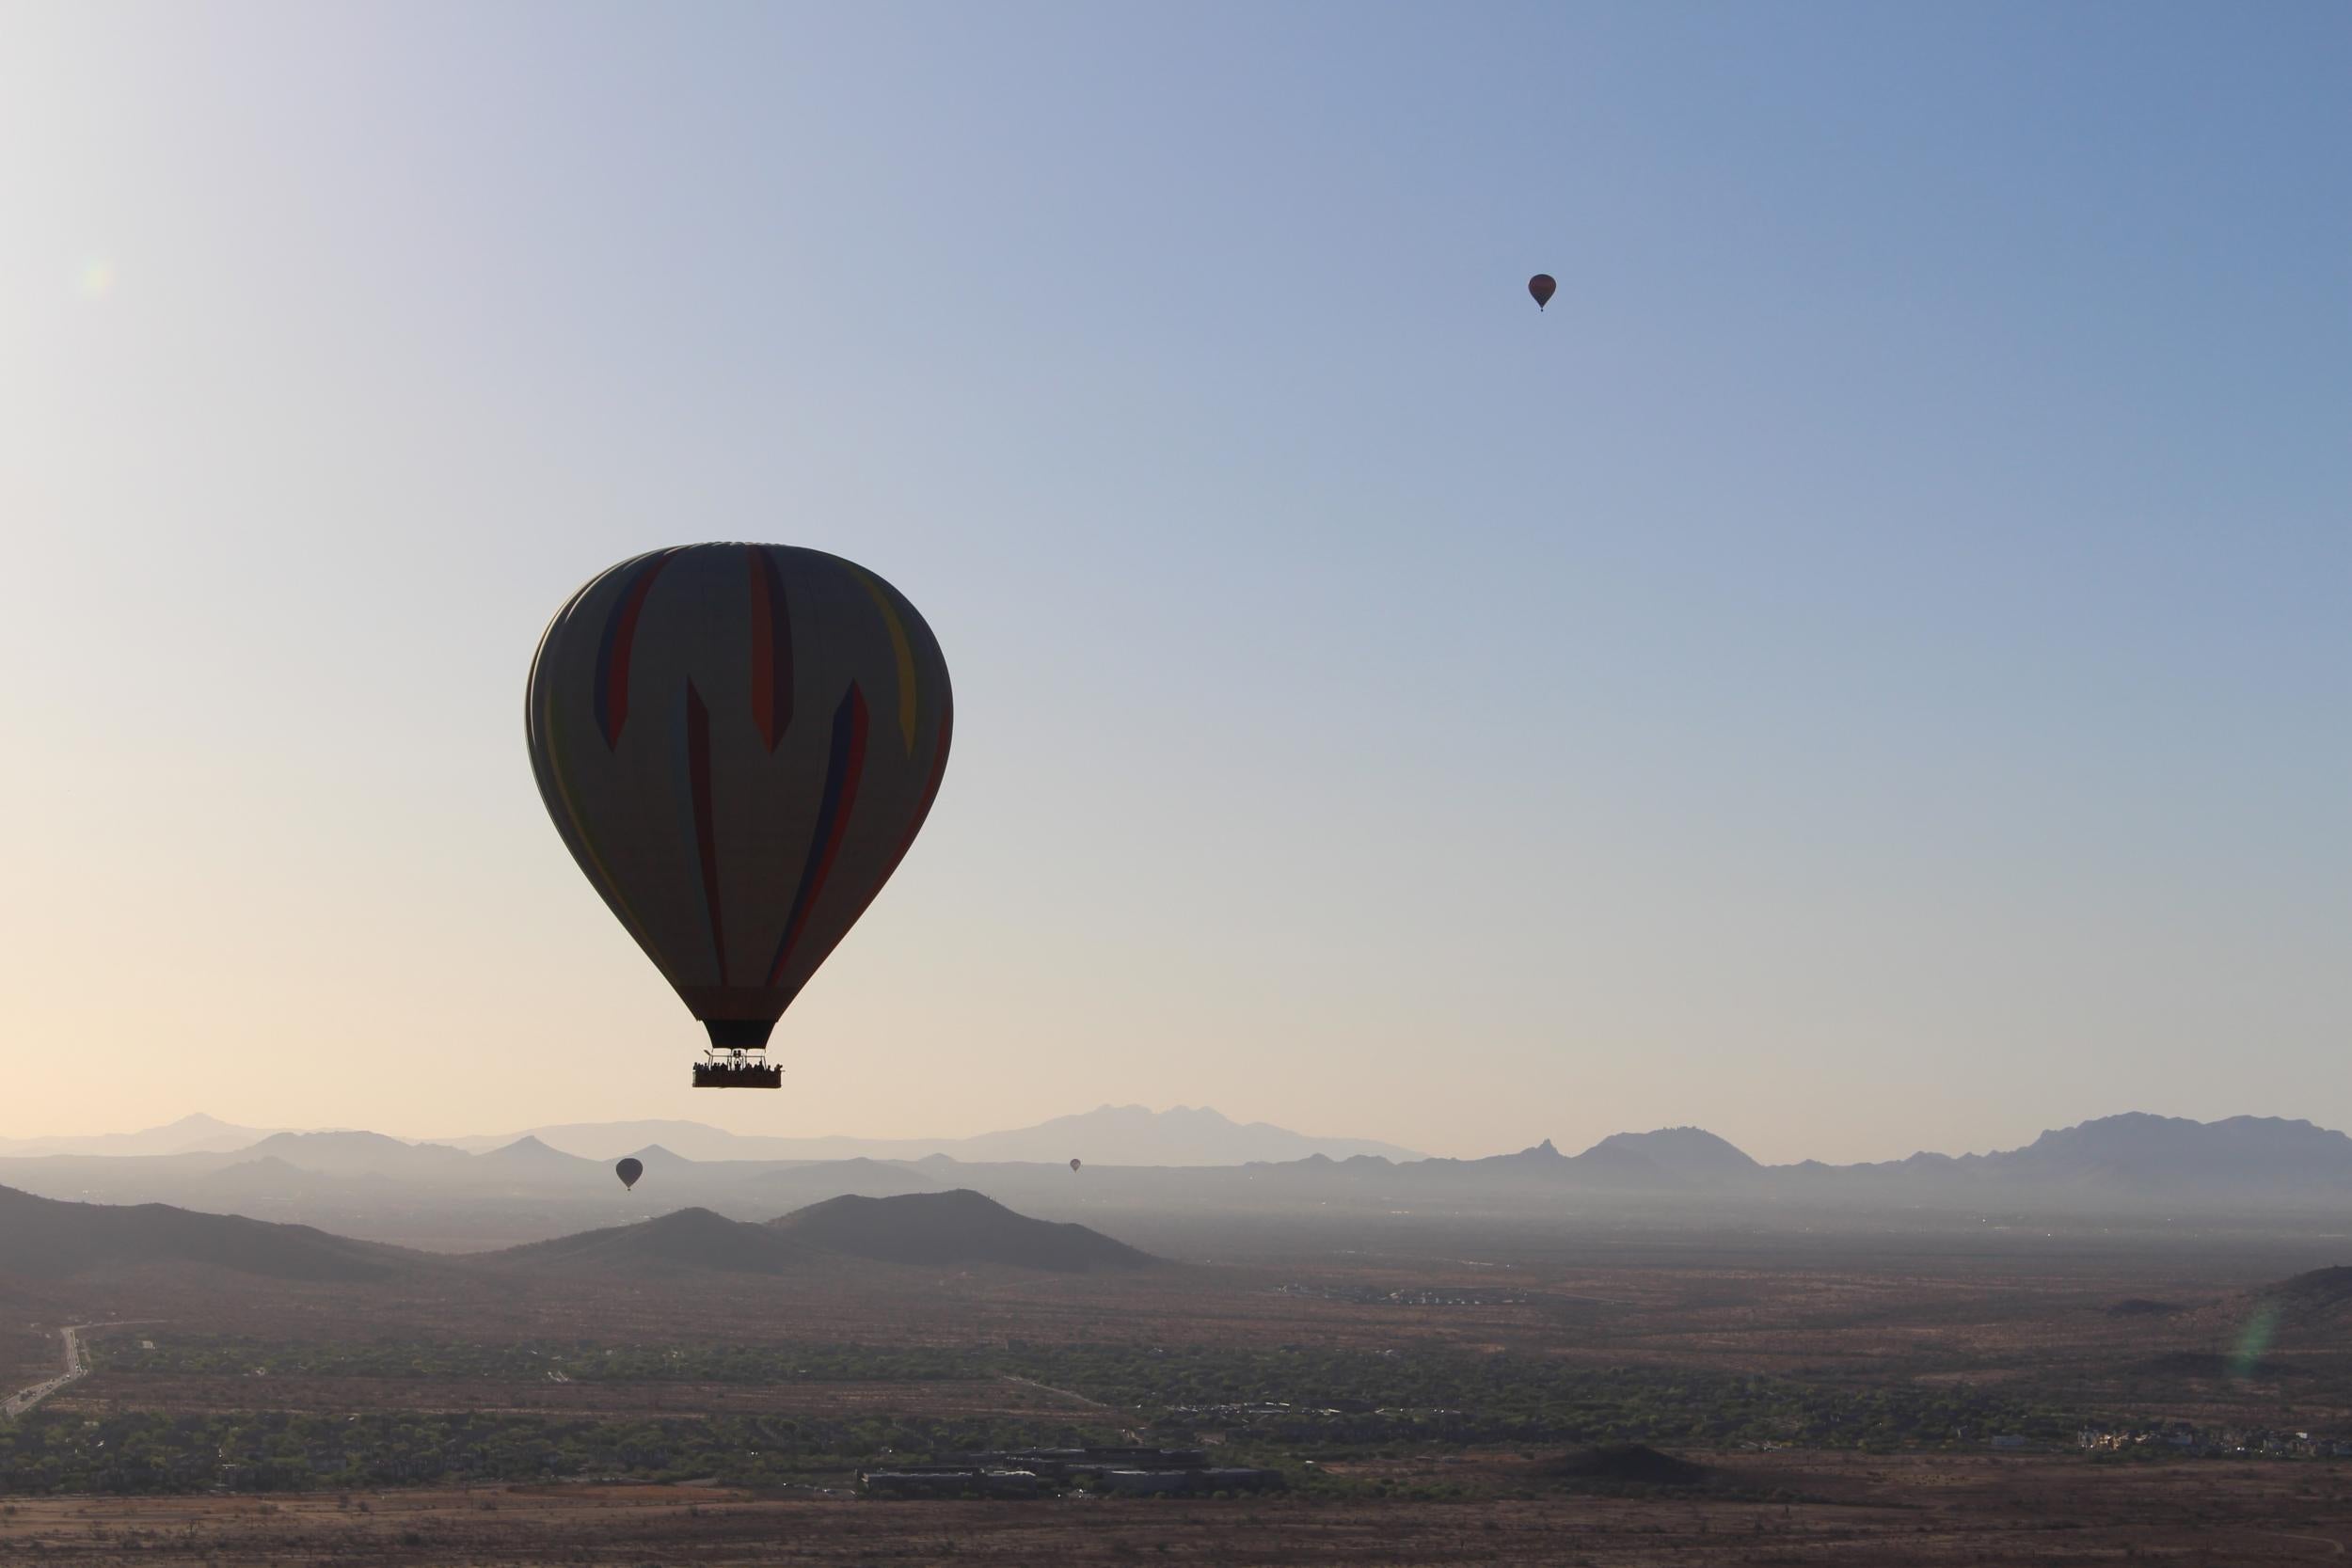 In the Arizona desert, getting in a hot air balloon counts as adventure